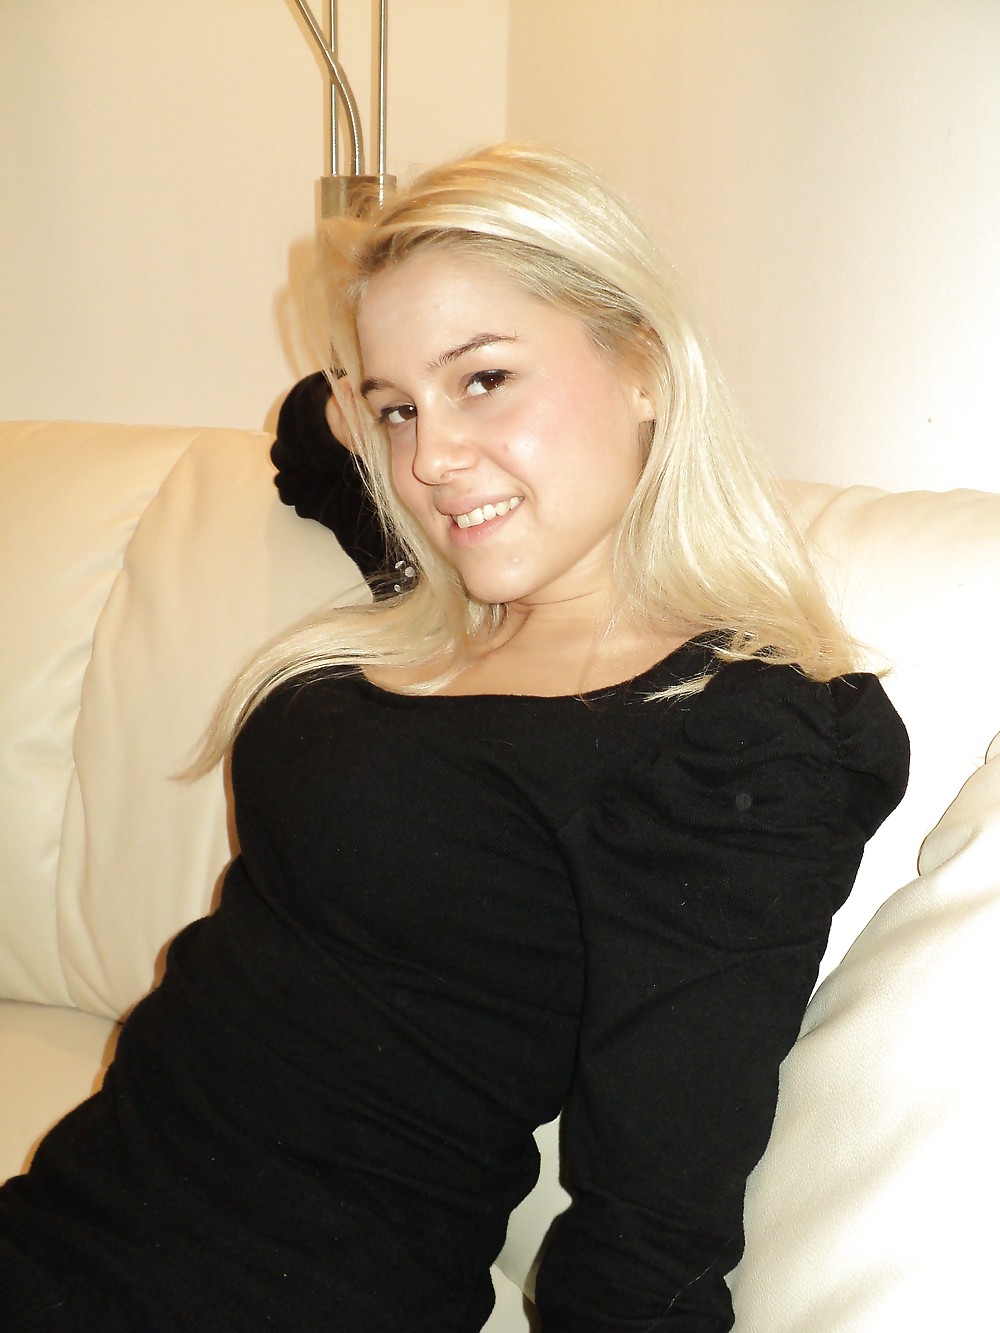 Free Exposed Without Her Consent 1 - Blonde ExGF Andrea photos